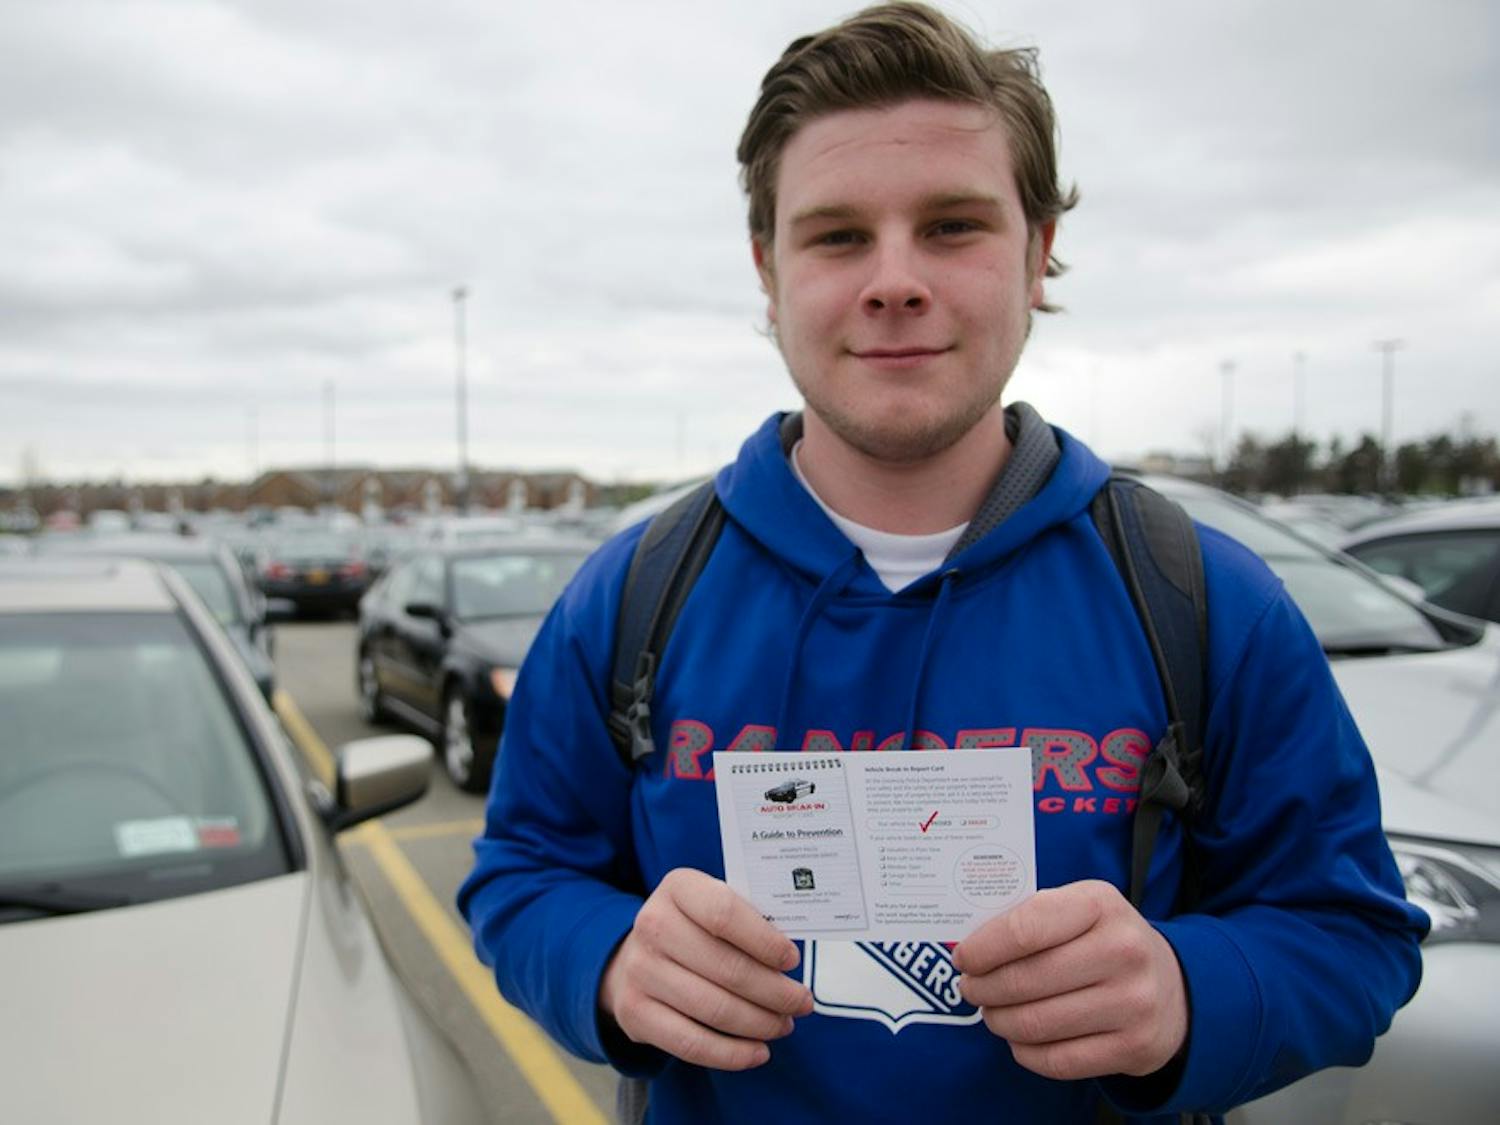 Nicholas Gross, a sophomore environmental design major, a received a passing grade on the ‘Vehicle Break-in Report Card’ placed on his car. UPD checks vehicles on campus to make sure they’re not susceptible to break-ins or theft and leaves 'Vehicle Break-In Report Cards’ indicating to students whether their cars are susceptible to  break-in.